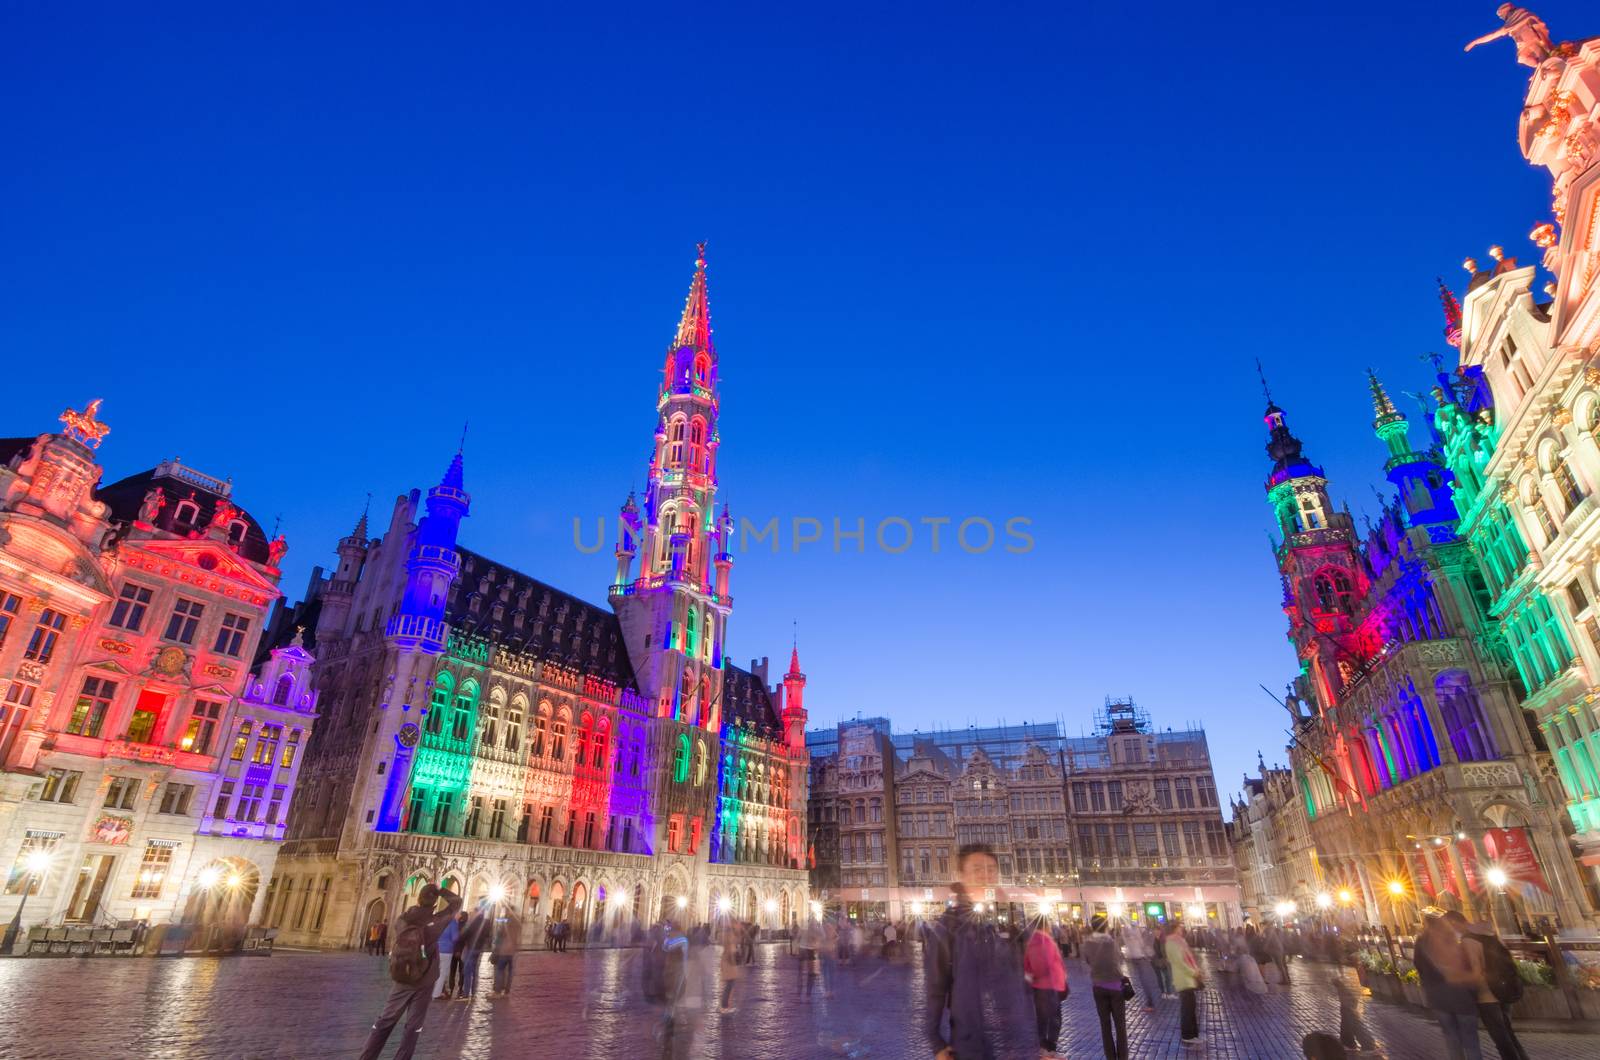 Brussels, Belgium - May 13, 2015: Tourists visiting famous Grand Place (Grote Markt) the central square of Brussels. by siraanamwong